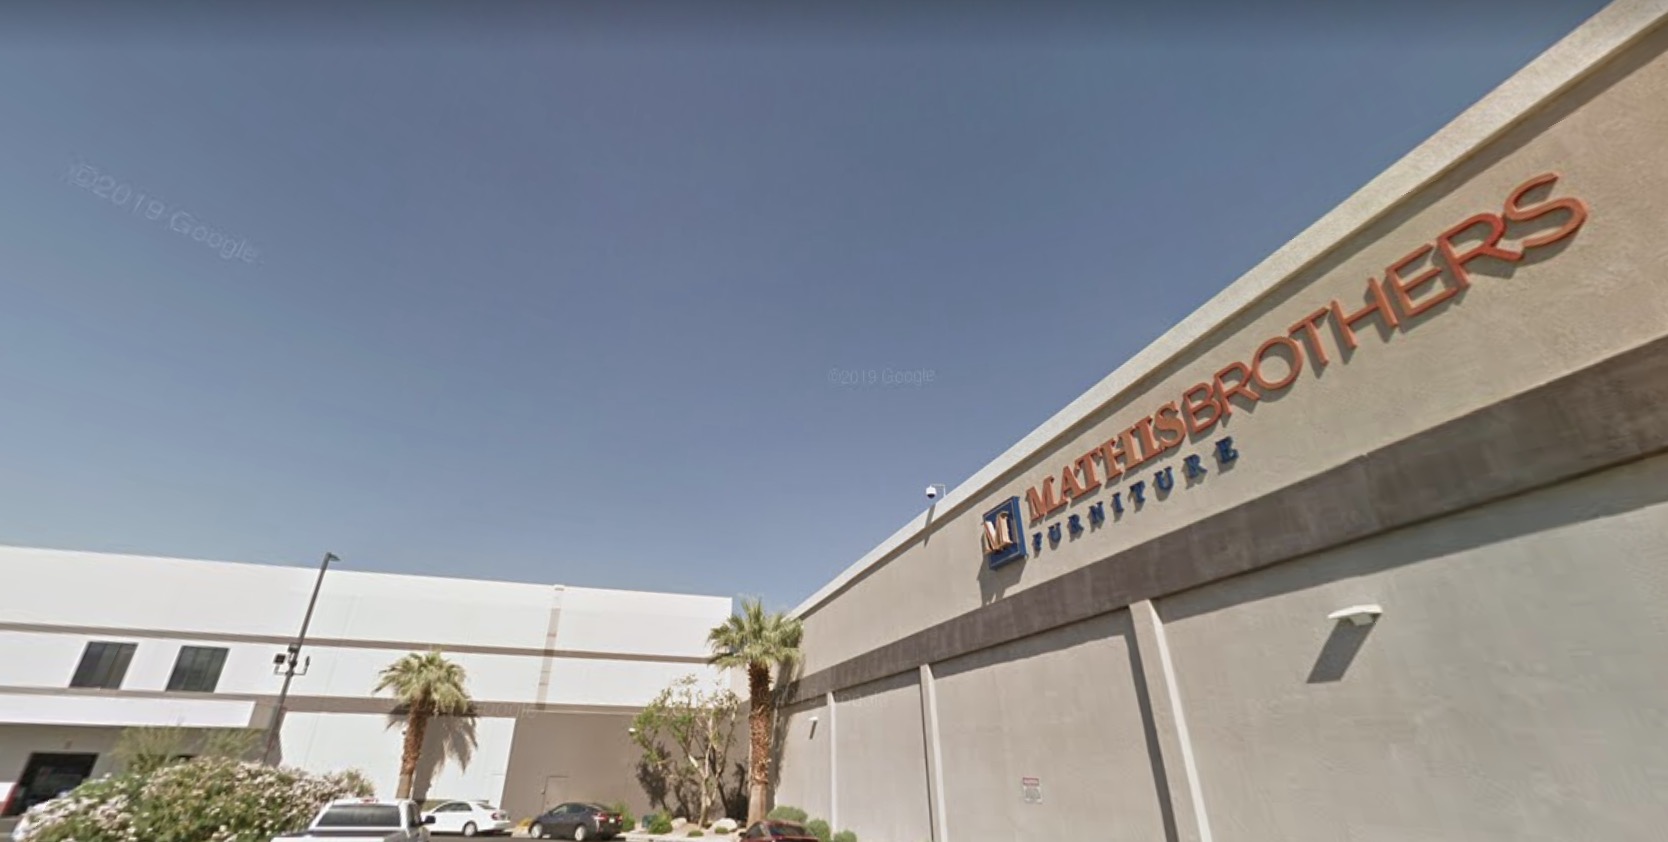 Mathis Brothers Furniture In Indio Has Temporarily Closed Again